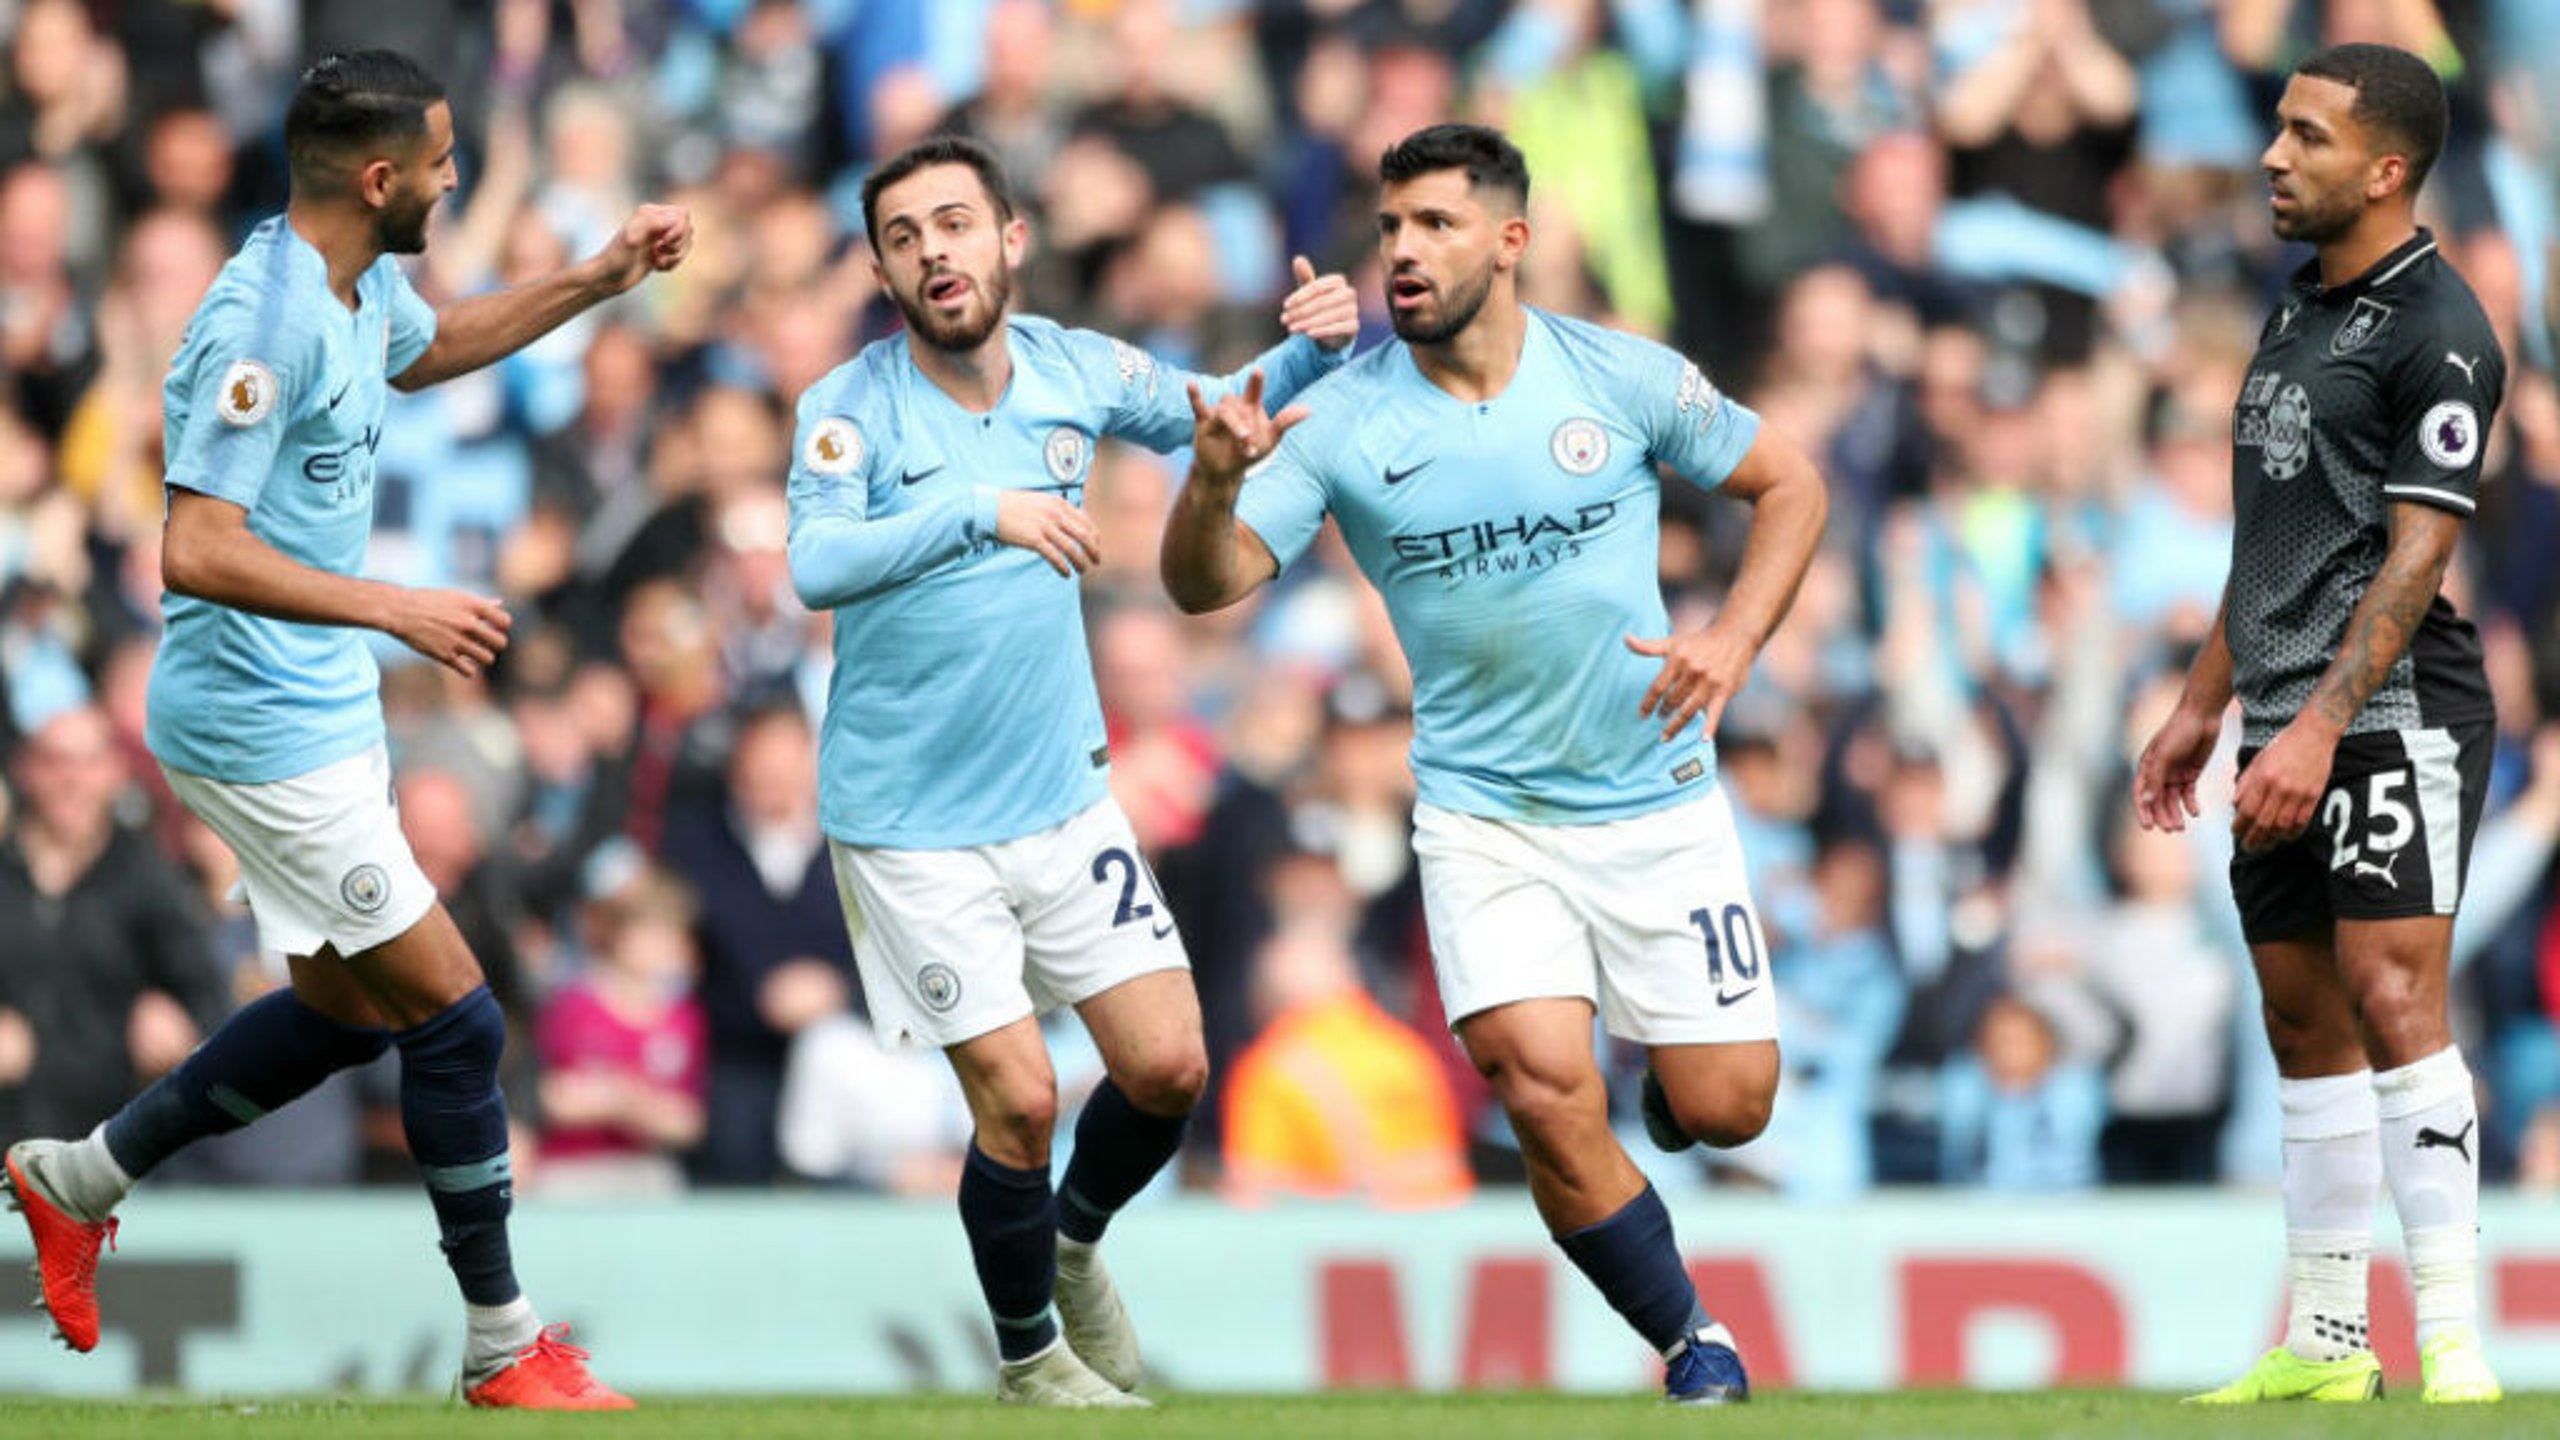 LETHAL WEAPON: Sergio Aguero wheels away in delight after opening the scoring